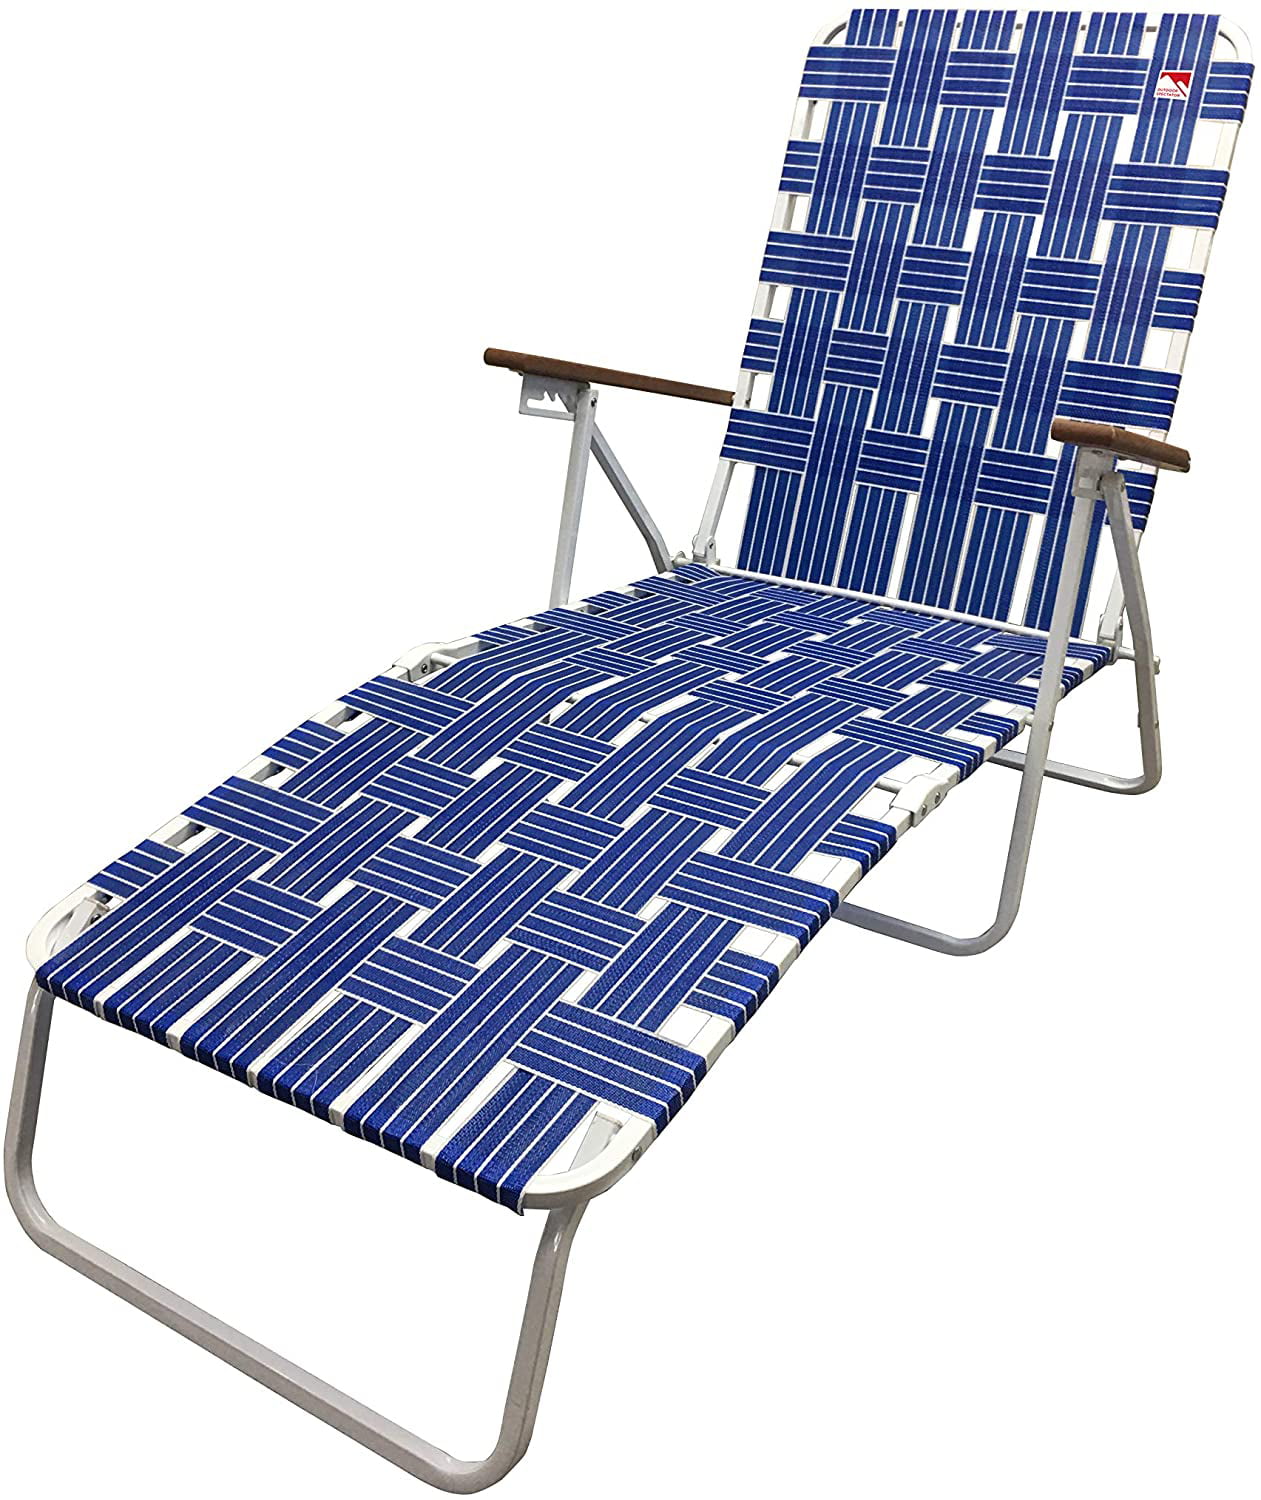 Outdoor Spectator Classic Webbed Folding Chaise Lounger Camp/Lawn Chair